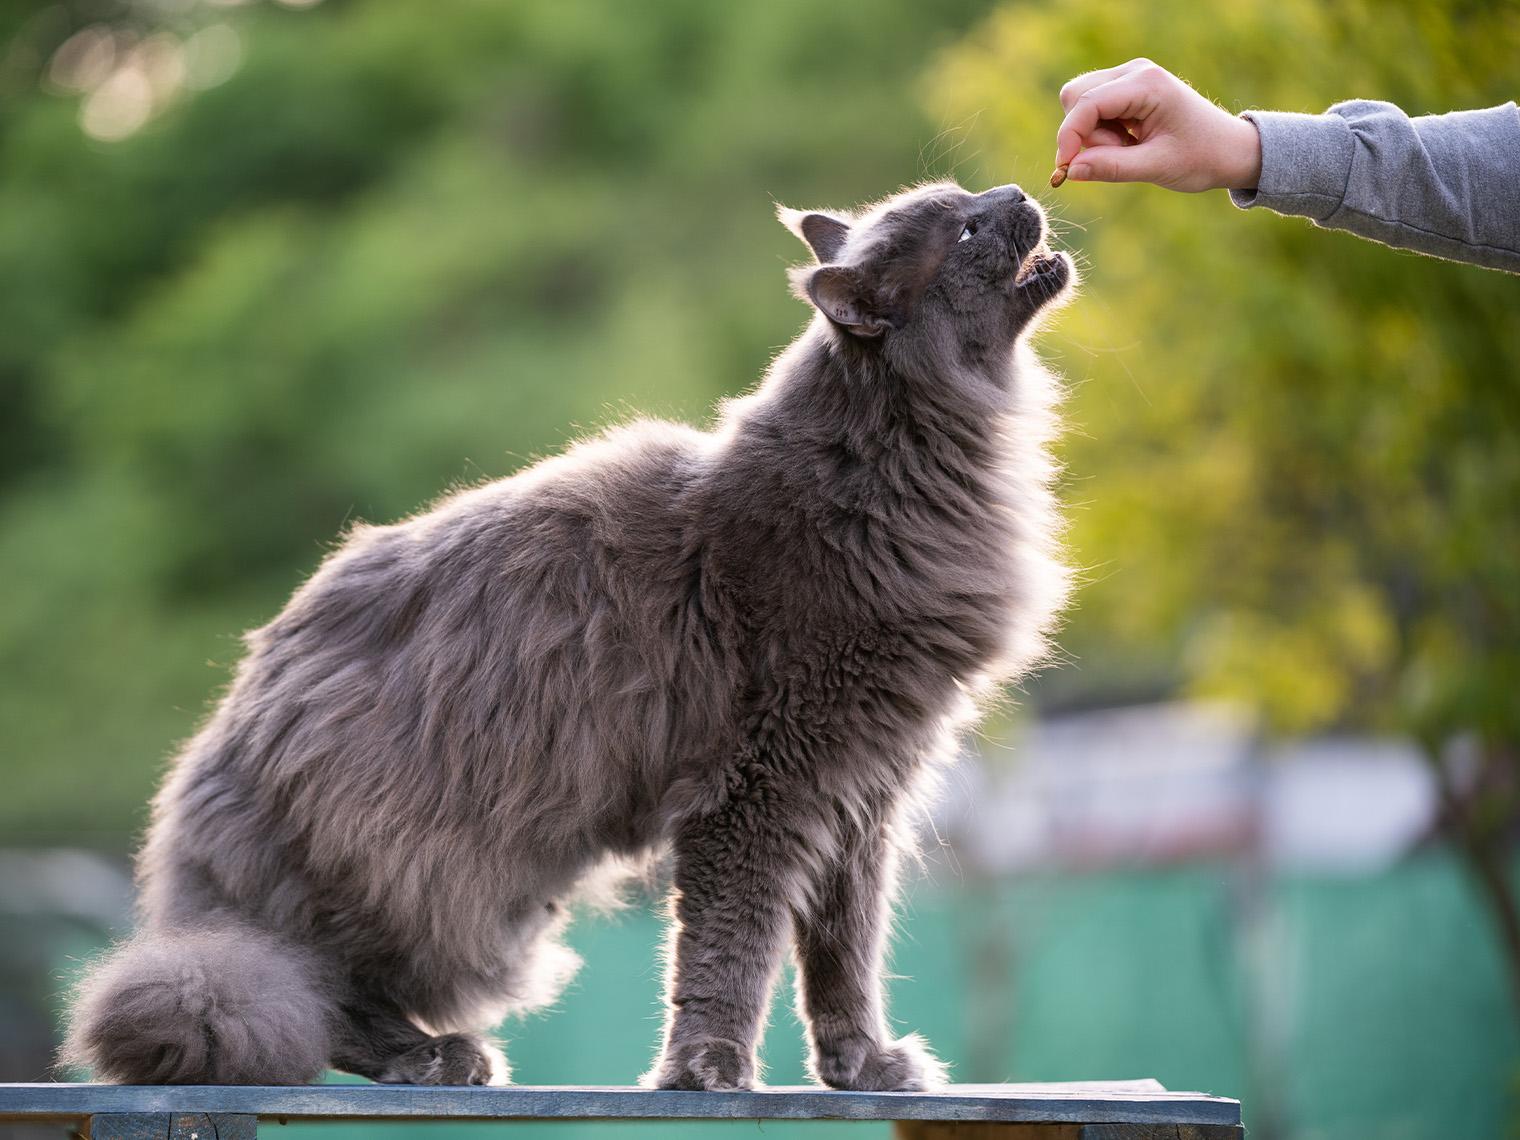 Maine coon cat takes treats